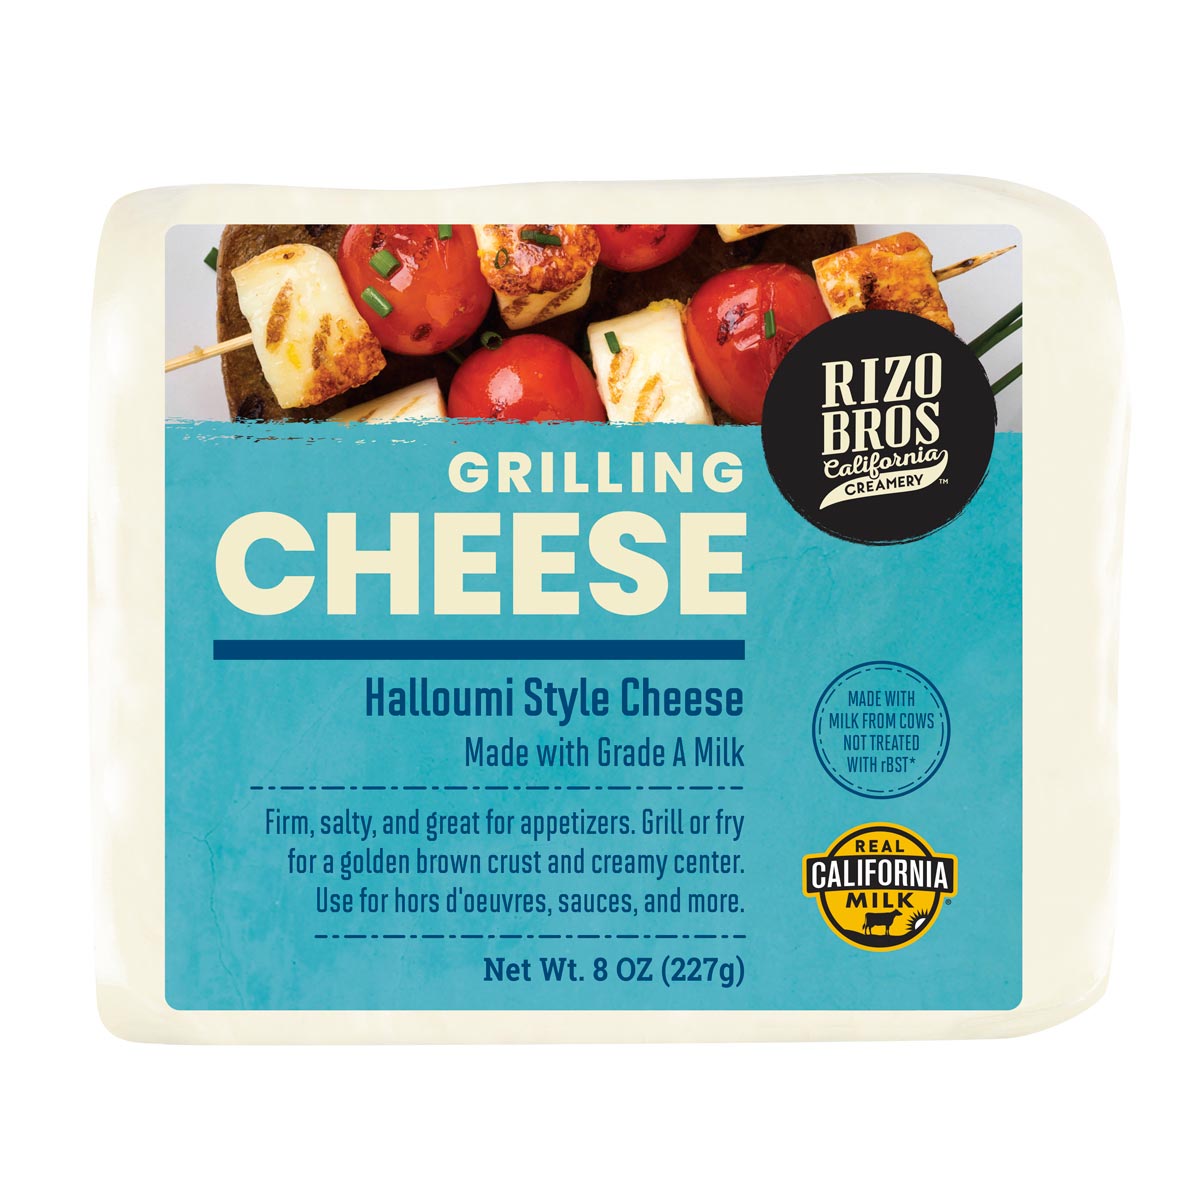 Grilling Cheese Packaging